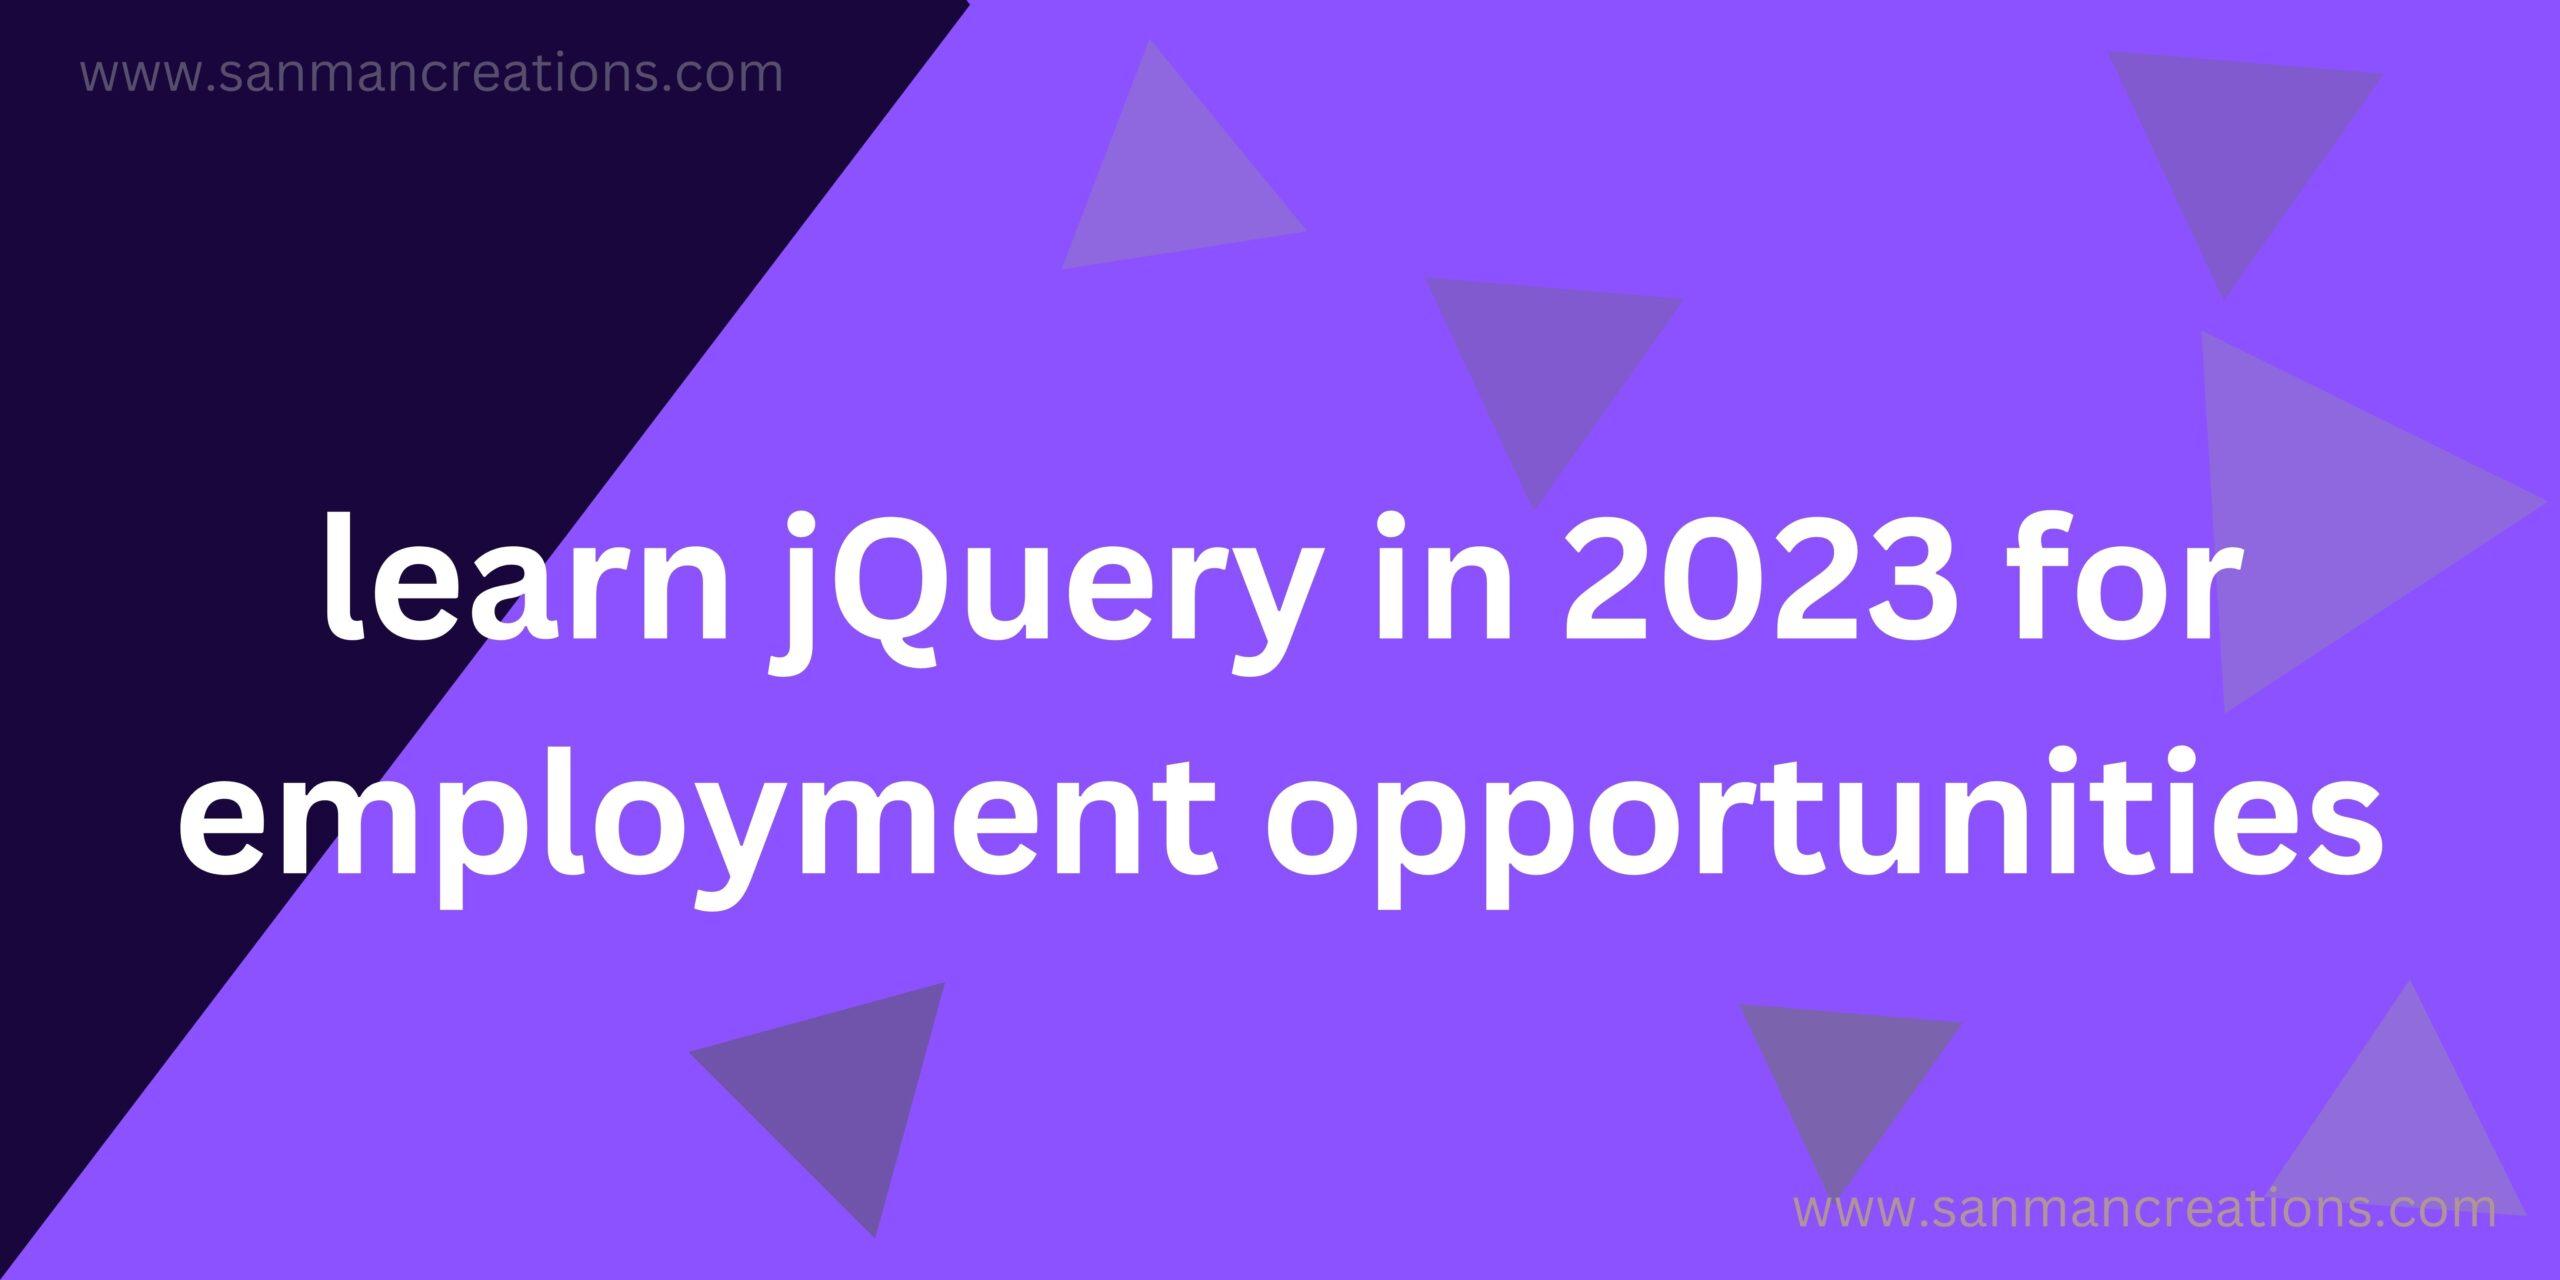 Is it still worth learning jQuery in 2023 for employment opportunities